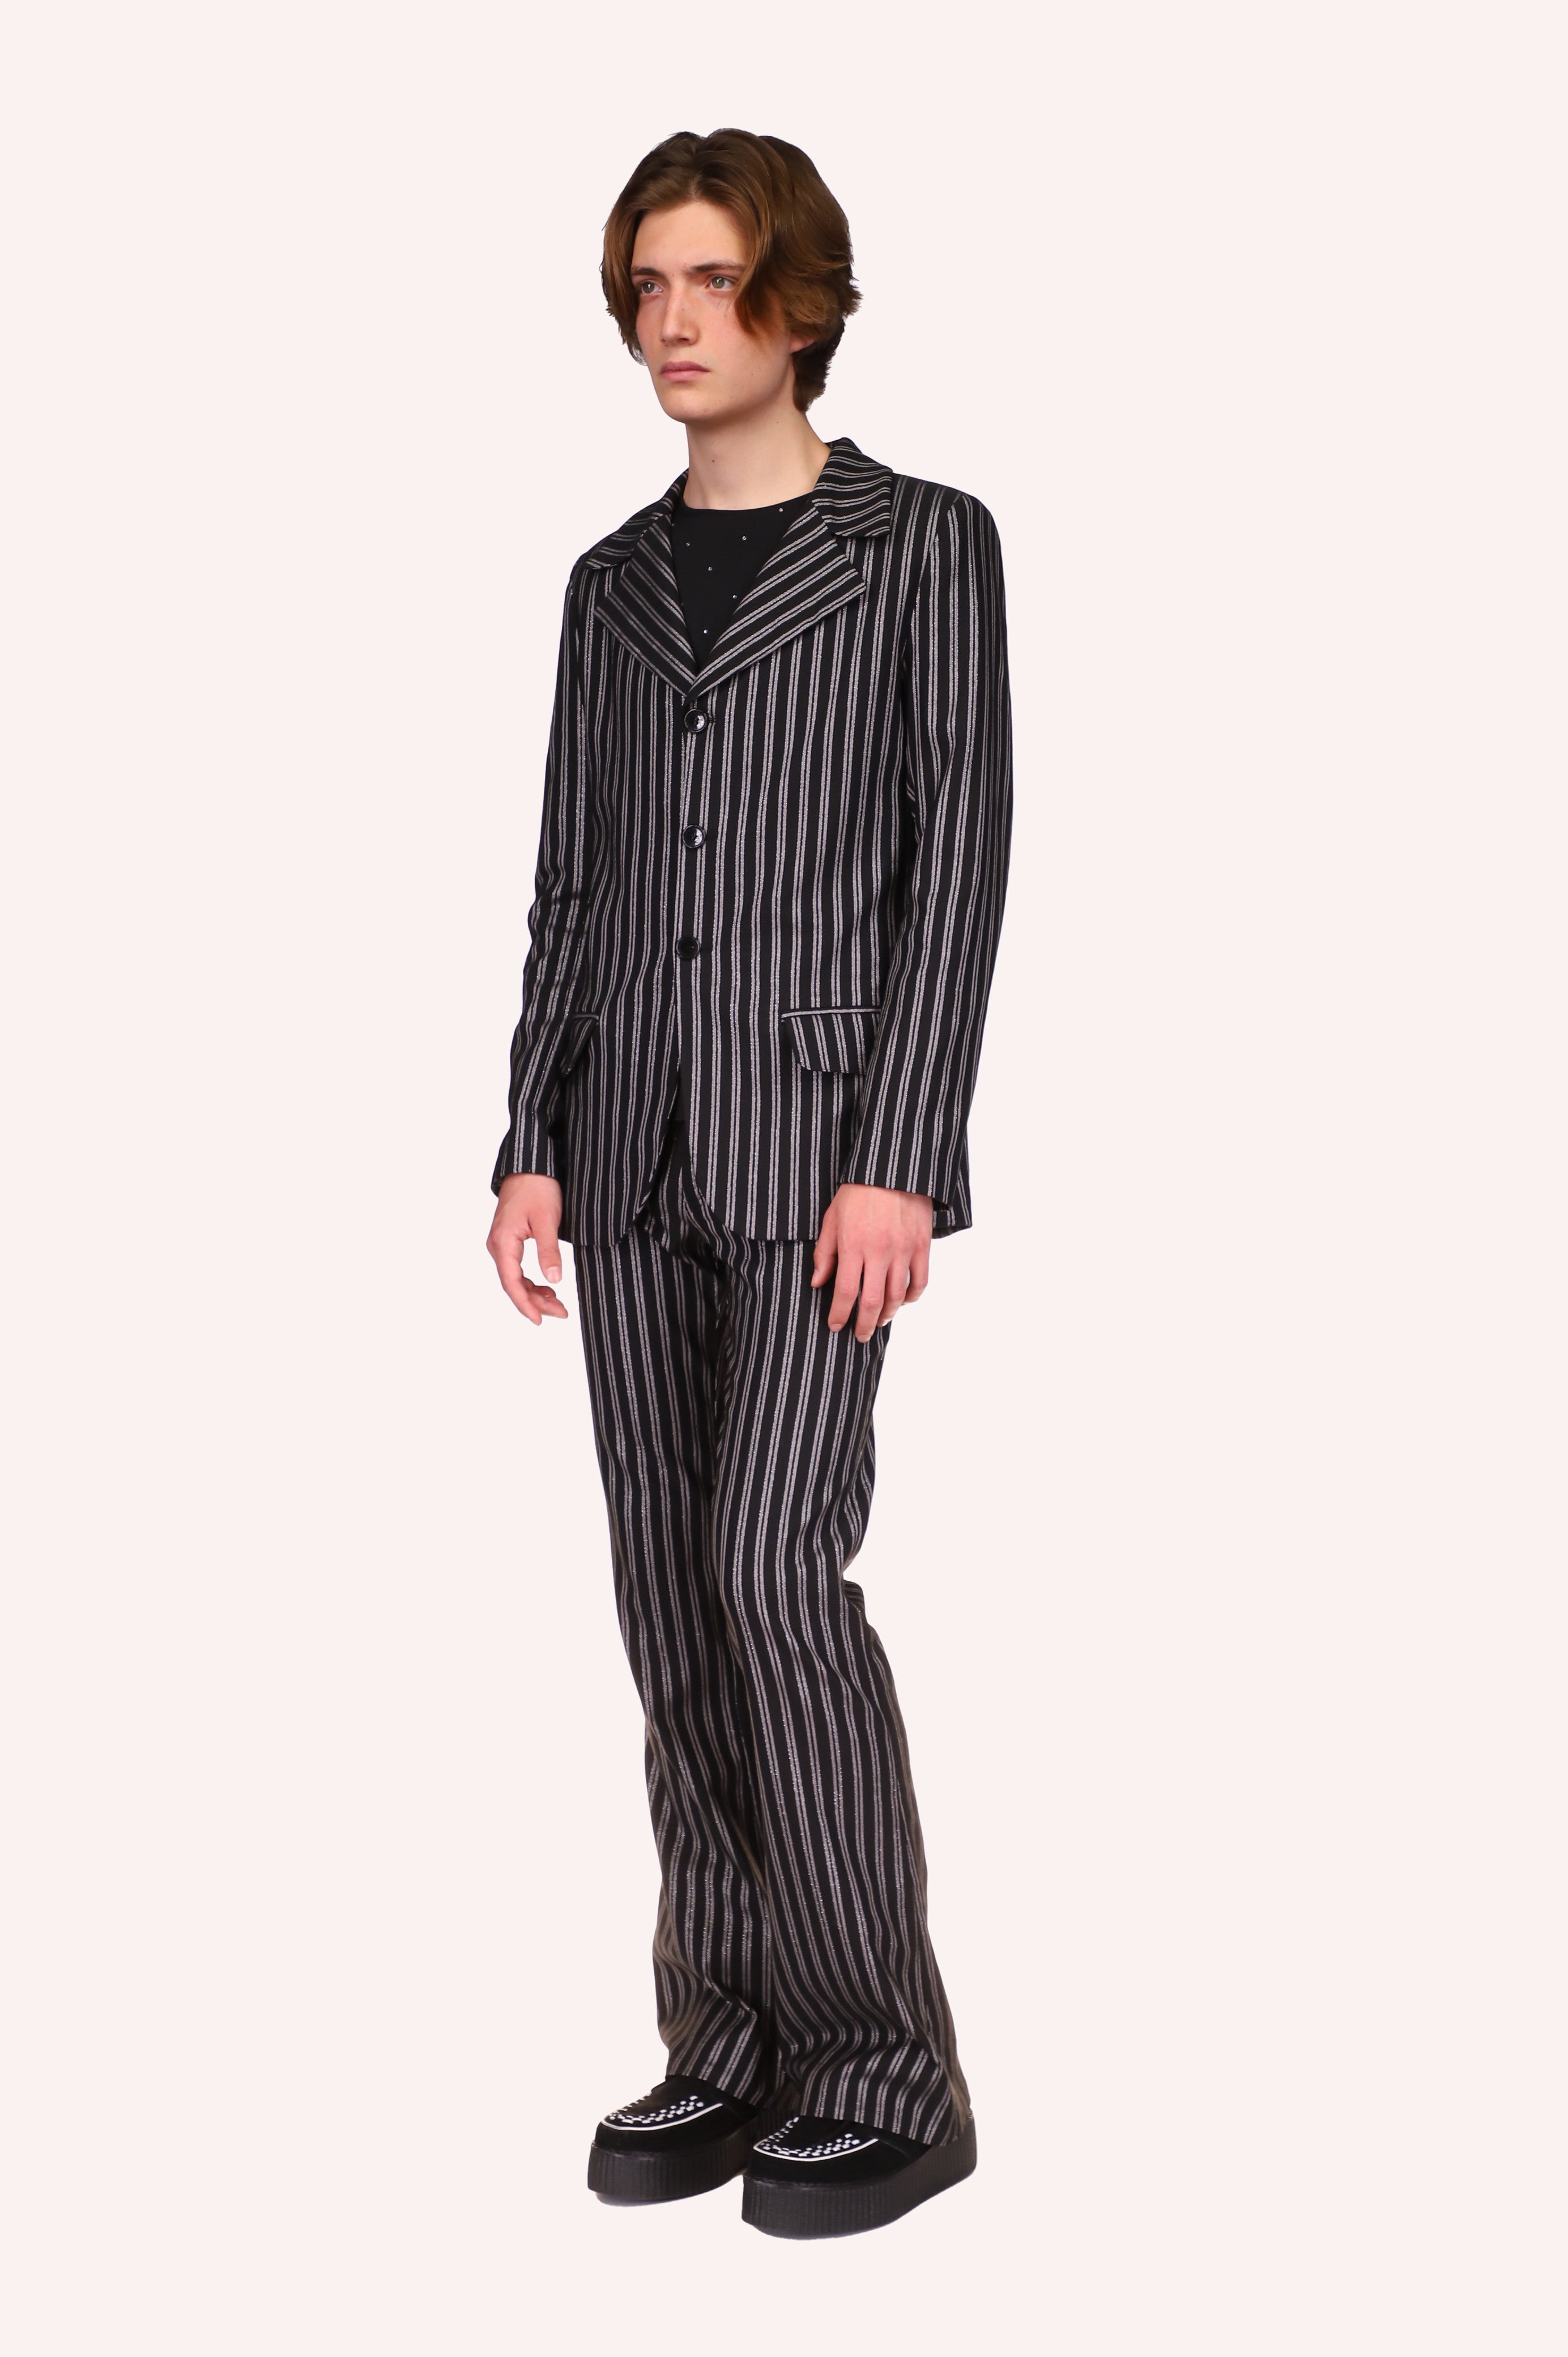 Pinstripe Jacket, long sleeves, large V-collar, 2 flapped pockets, long black and white stripes down, 3 buttons